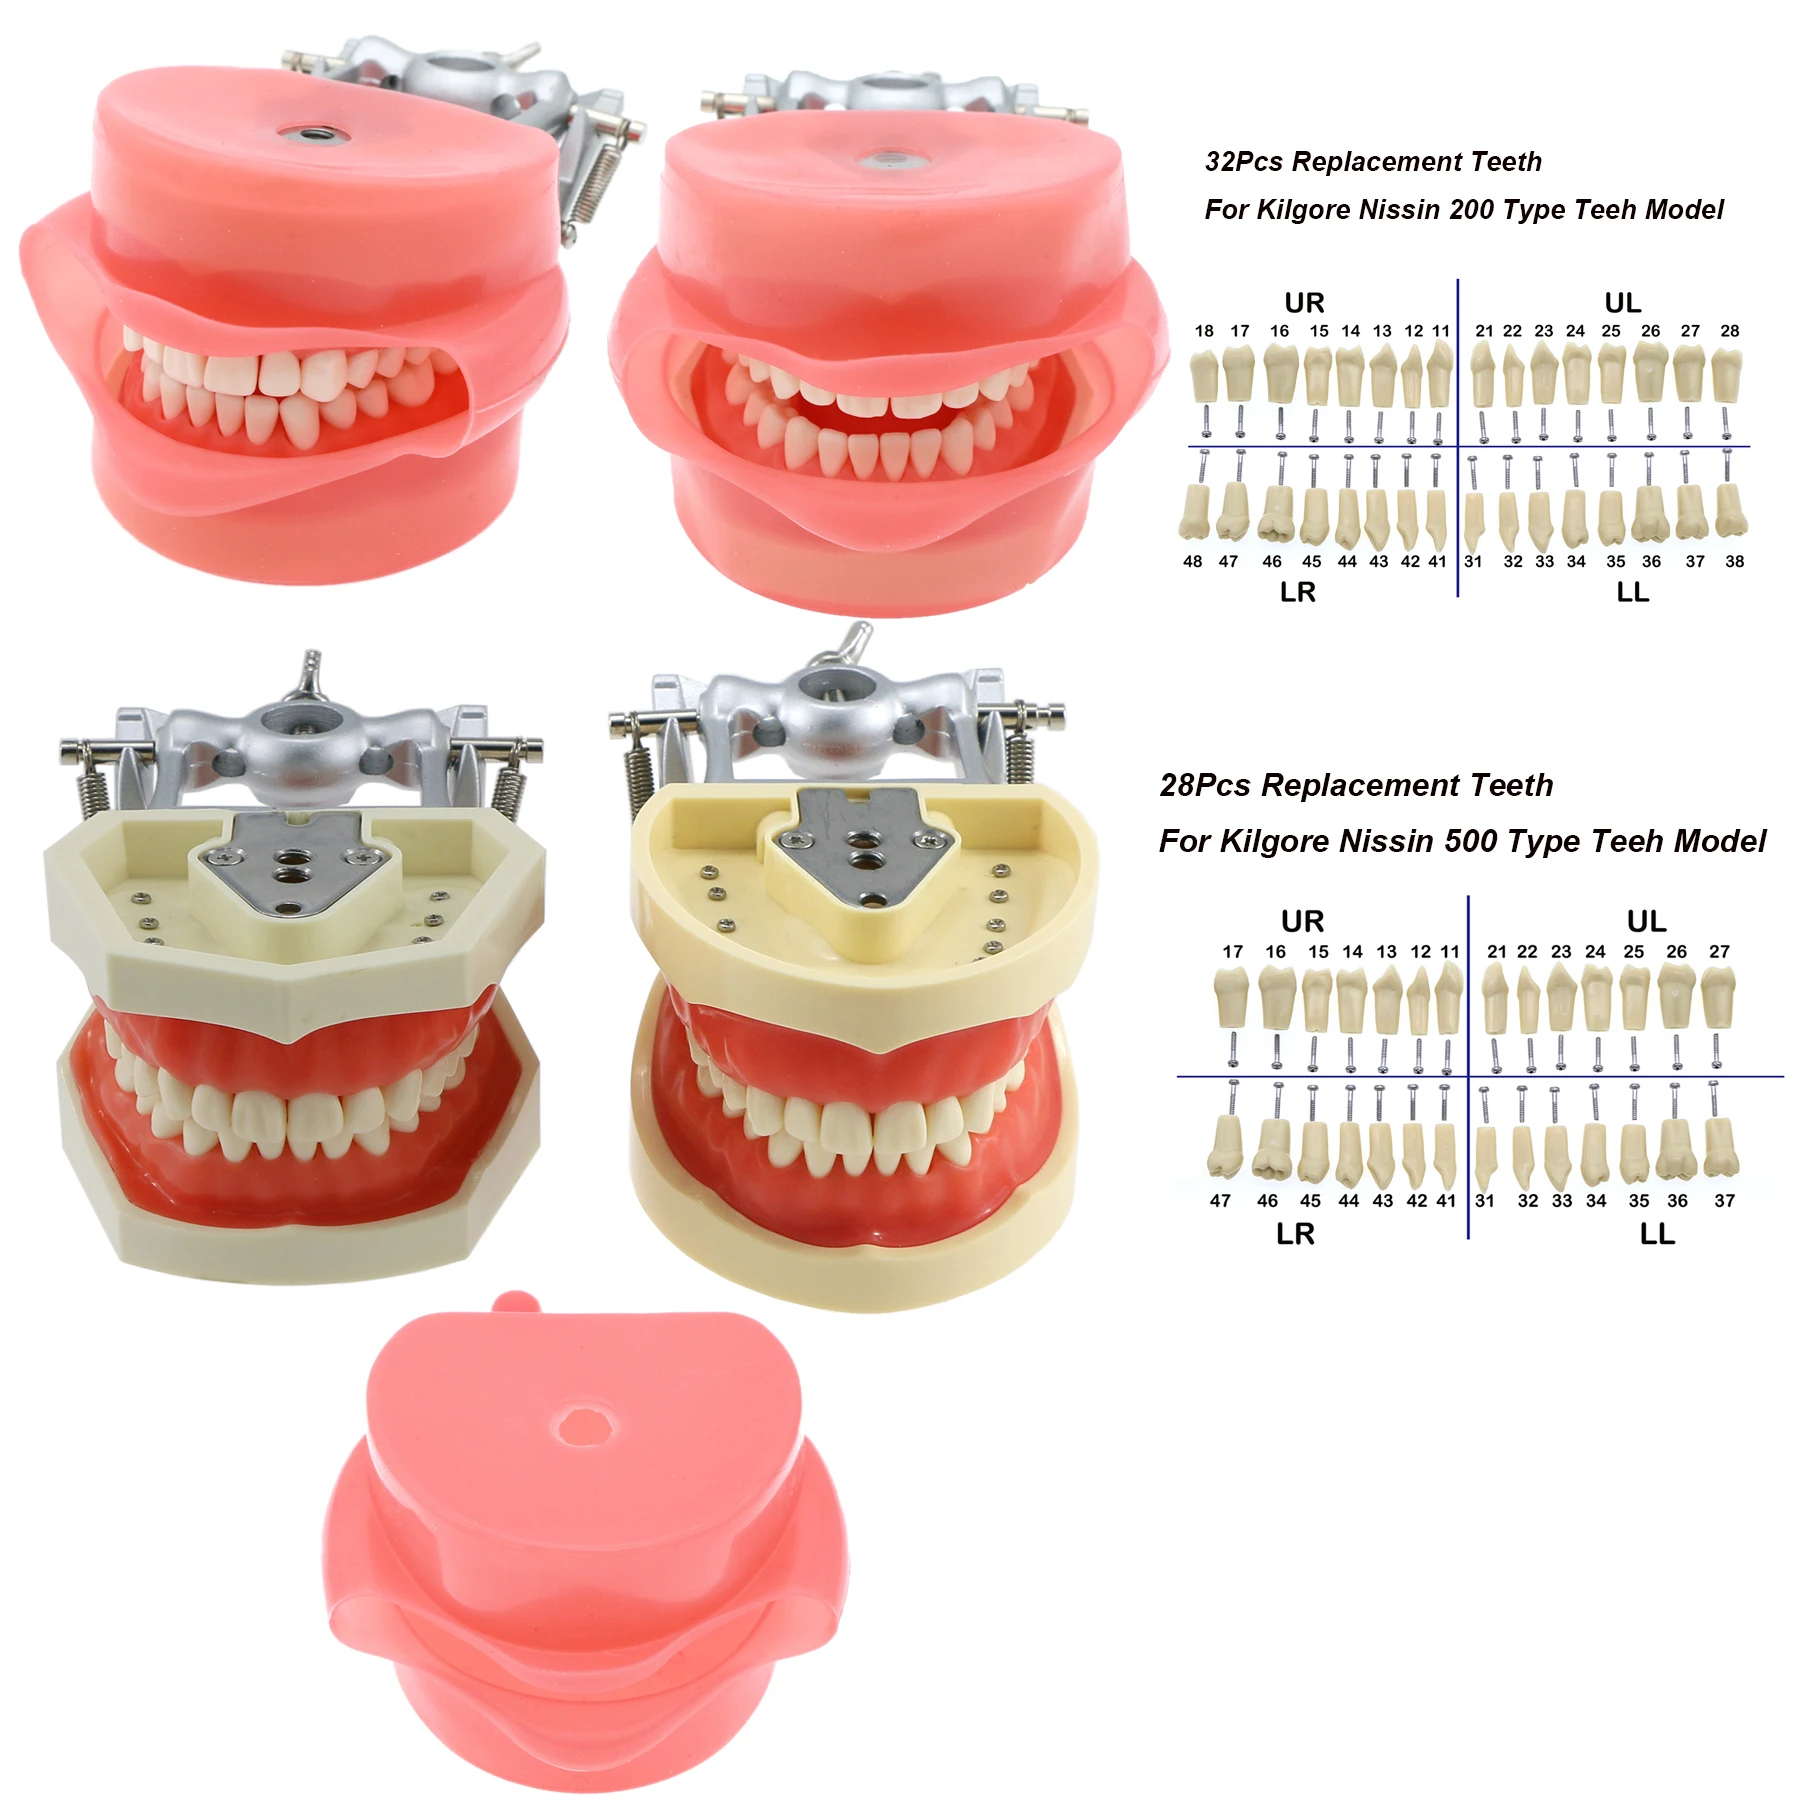 Dental Typodont Model 28 32 Pcs Removable Teeth and Simulation Cheek for Dentist Teaching Study